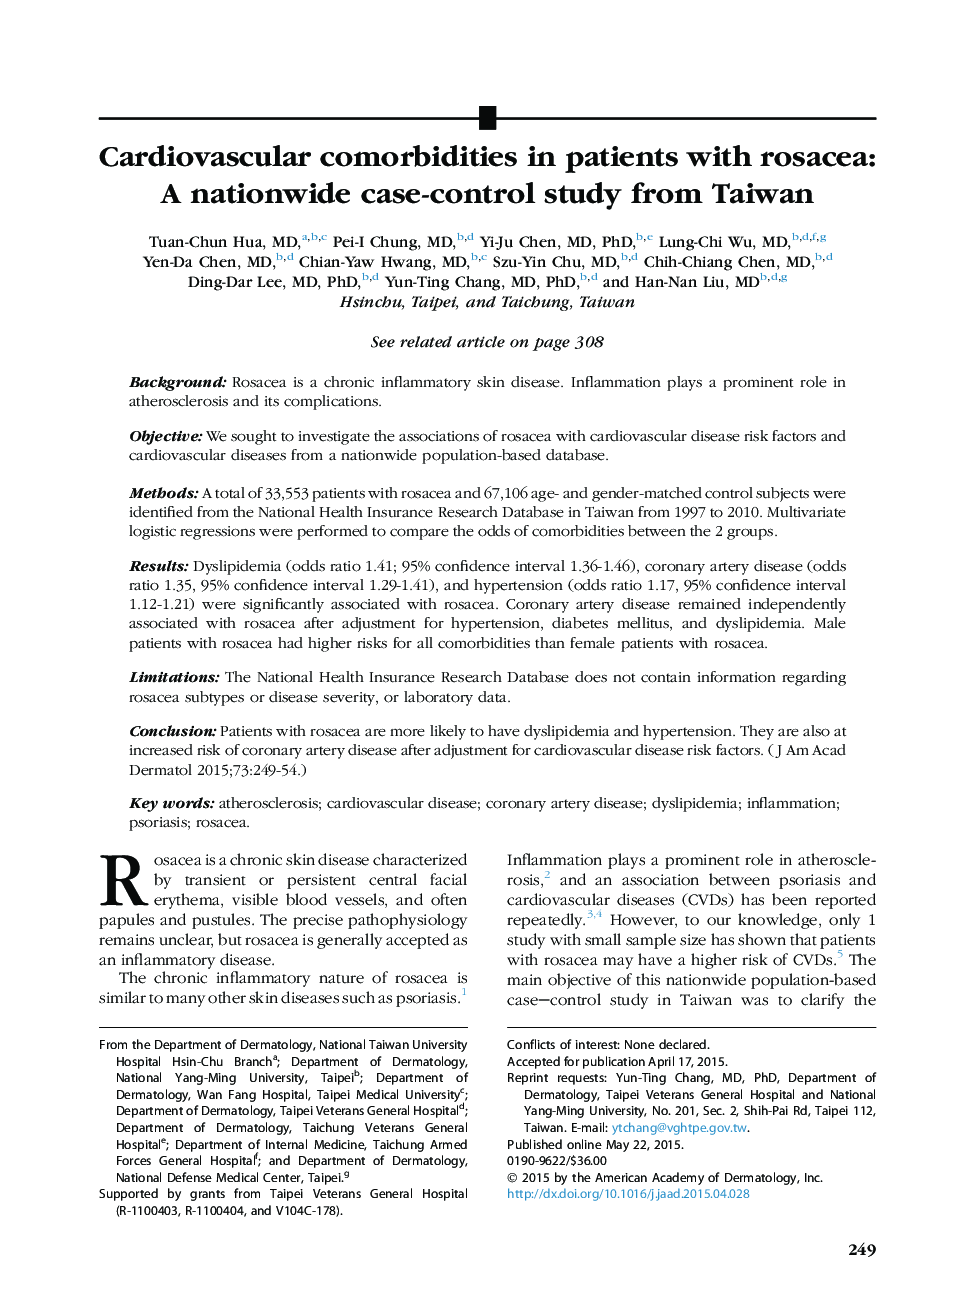 Original articleCardiovascular comorbidities in patients with rosacea: A nationwide case-control study from Taiwan